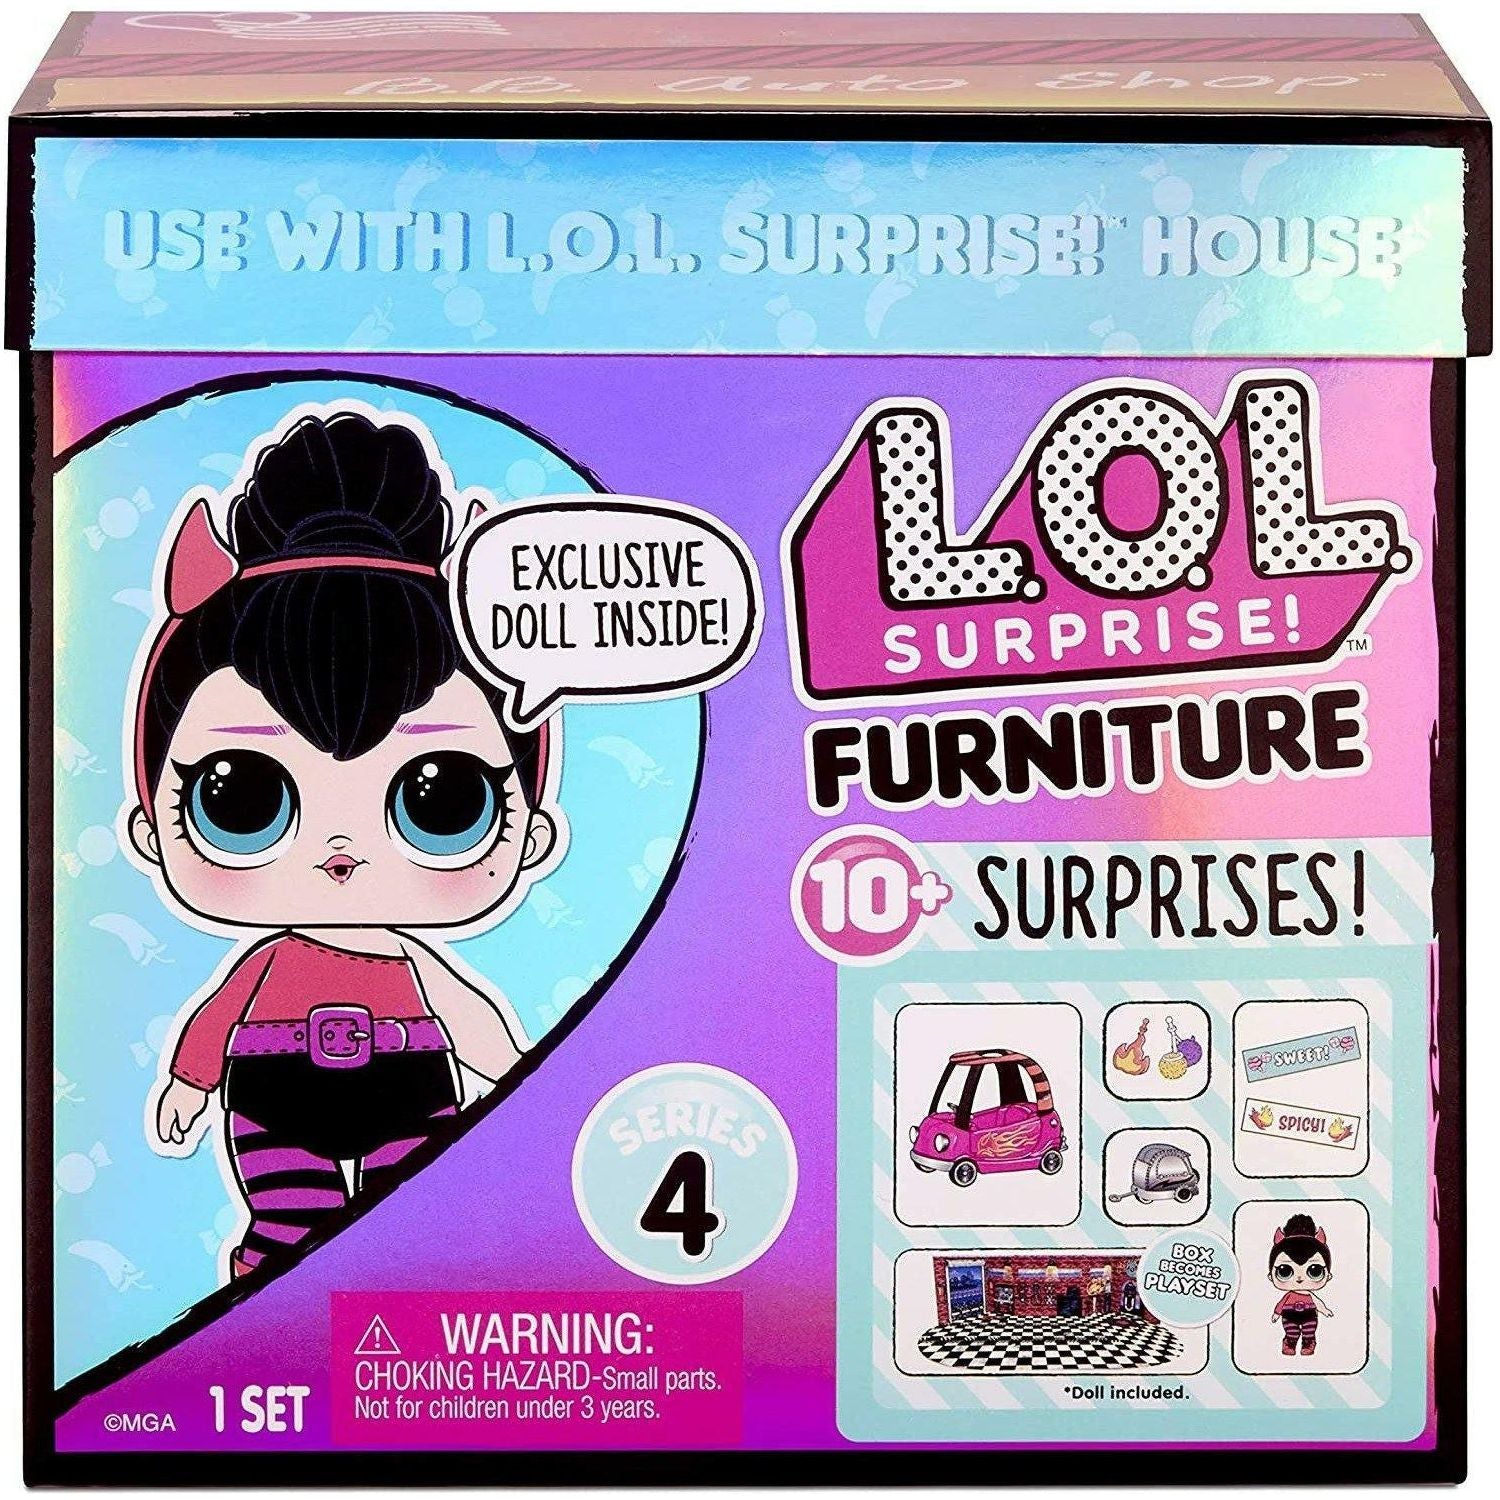 L.O.L Surprise B.B. Auto Shop with Spice Doll and 10+ Surprises - BumbleToys - 5-7 Years, Dolls, Fashion Dolls & Accessories, Girls, L.O.L, OXE